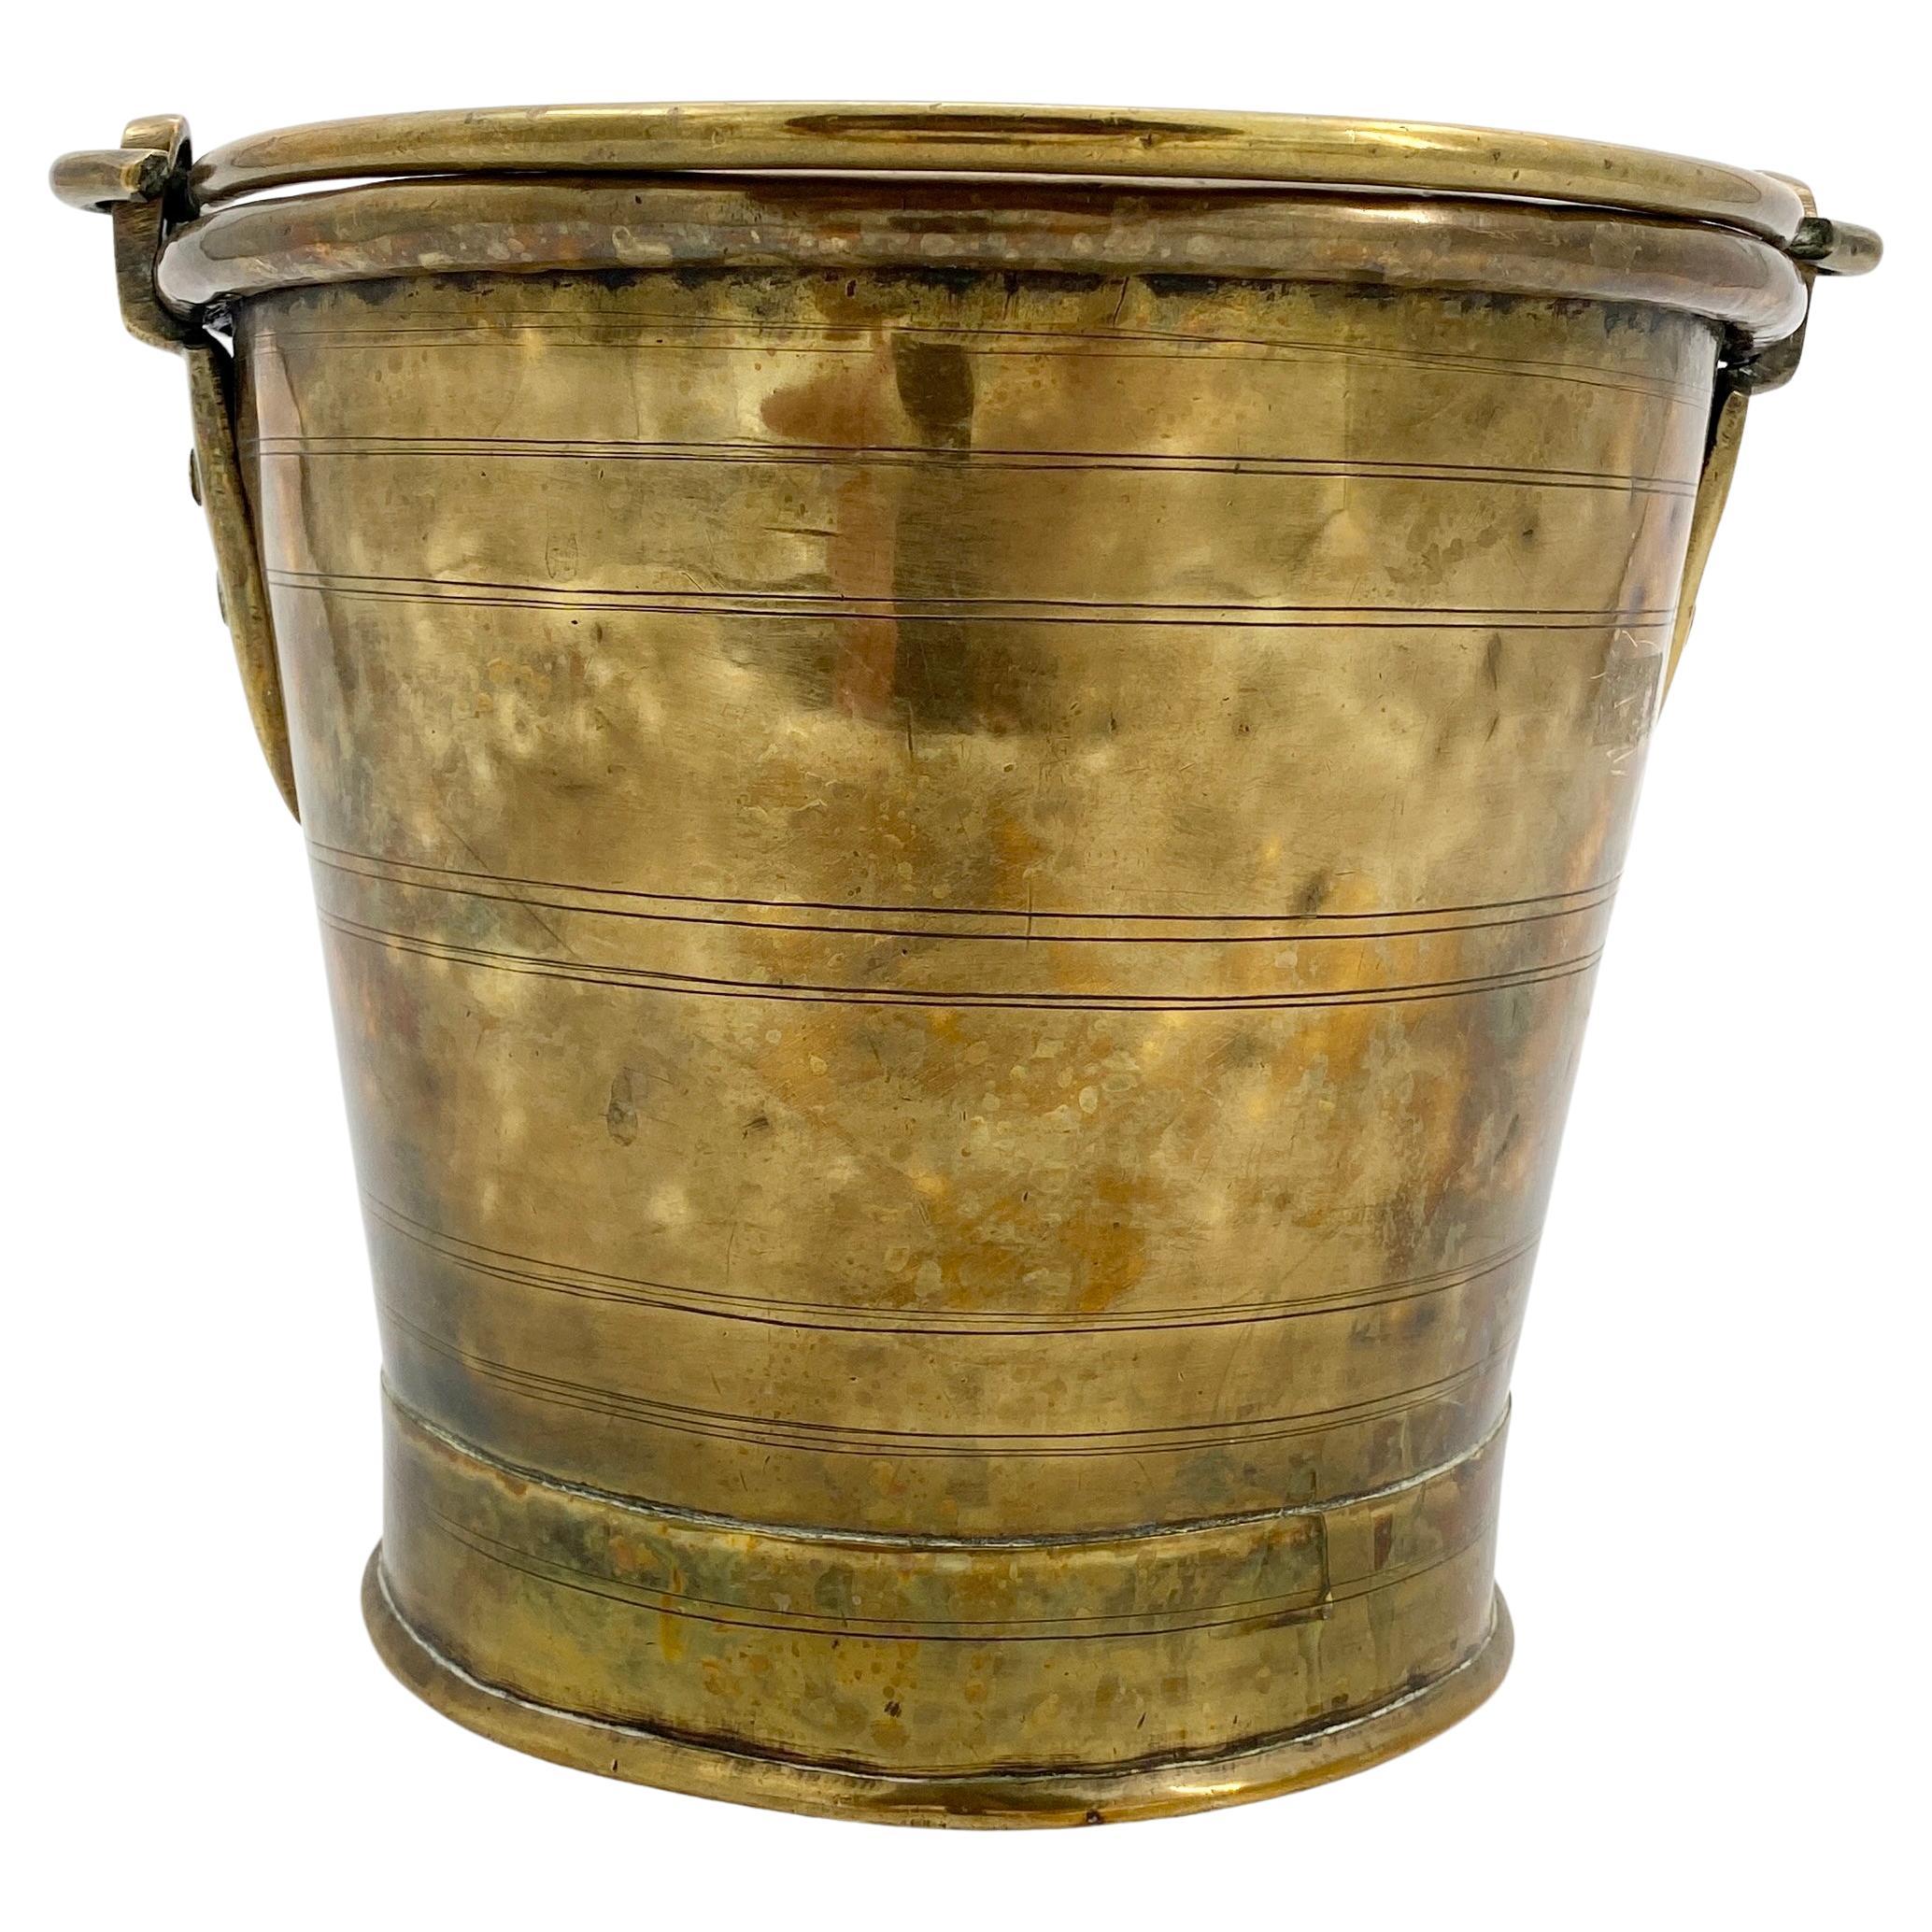 Antique Scandinavian coal or fireplace bucket in Thick Brass, Circa 1810

Scandinavian coal or fireplace bucket with its original patina. It dates back to circa 1800. Hand forged brass handle, rivets, inner pewter lining and a honest and